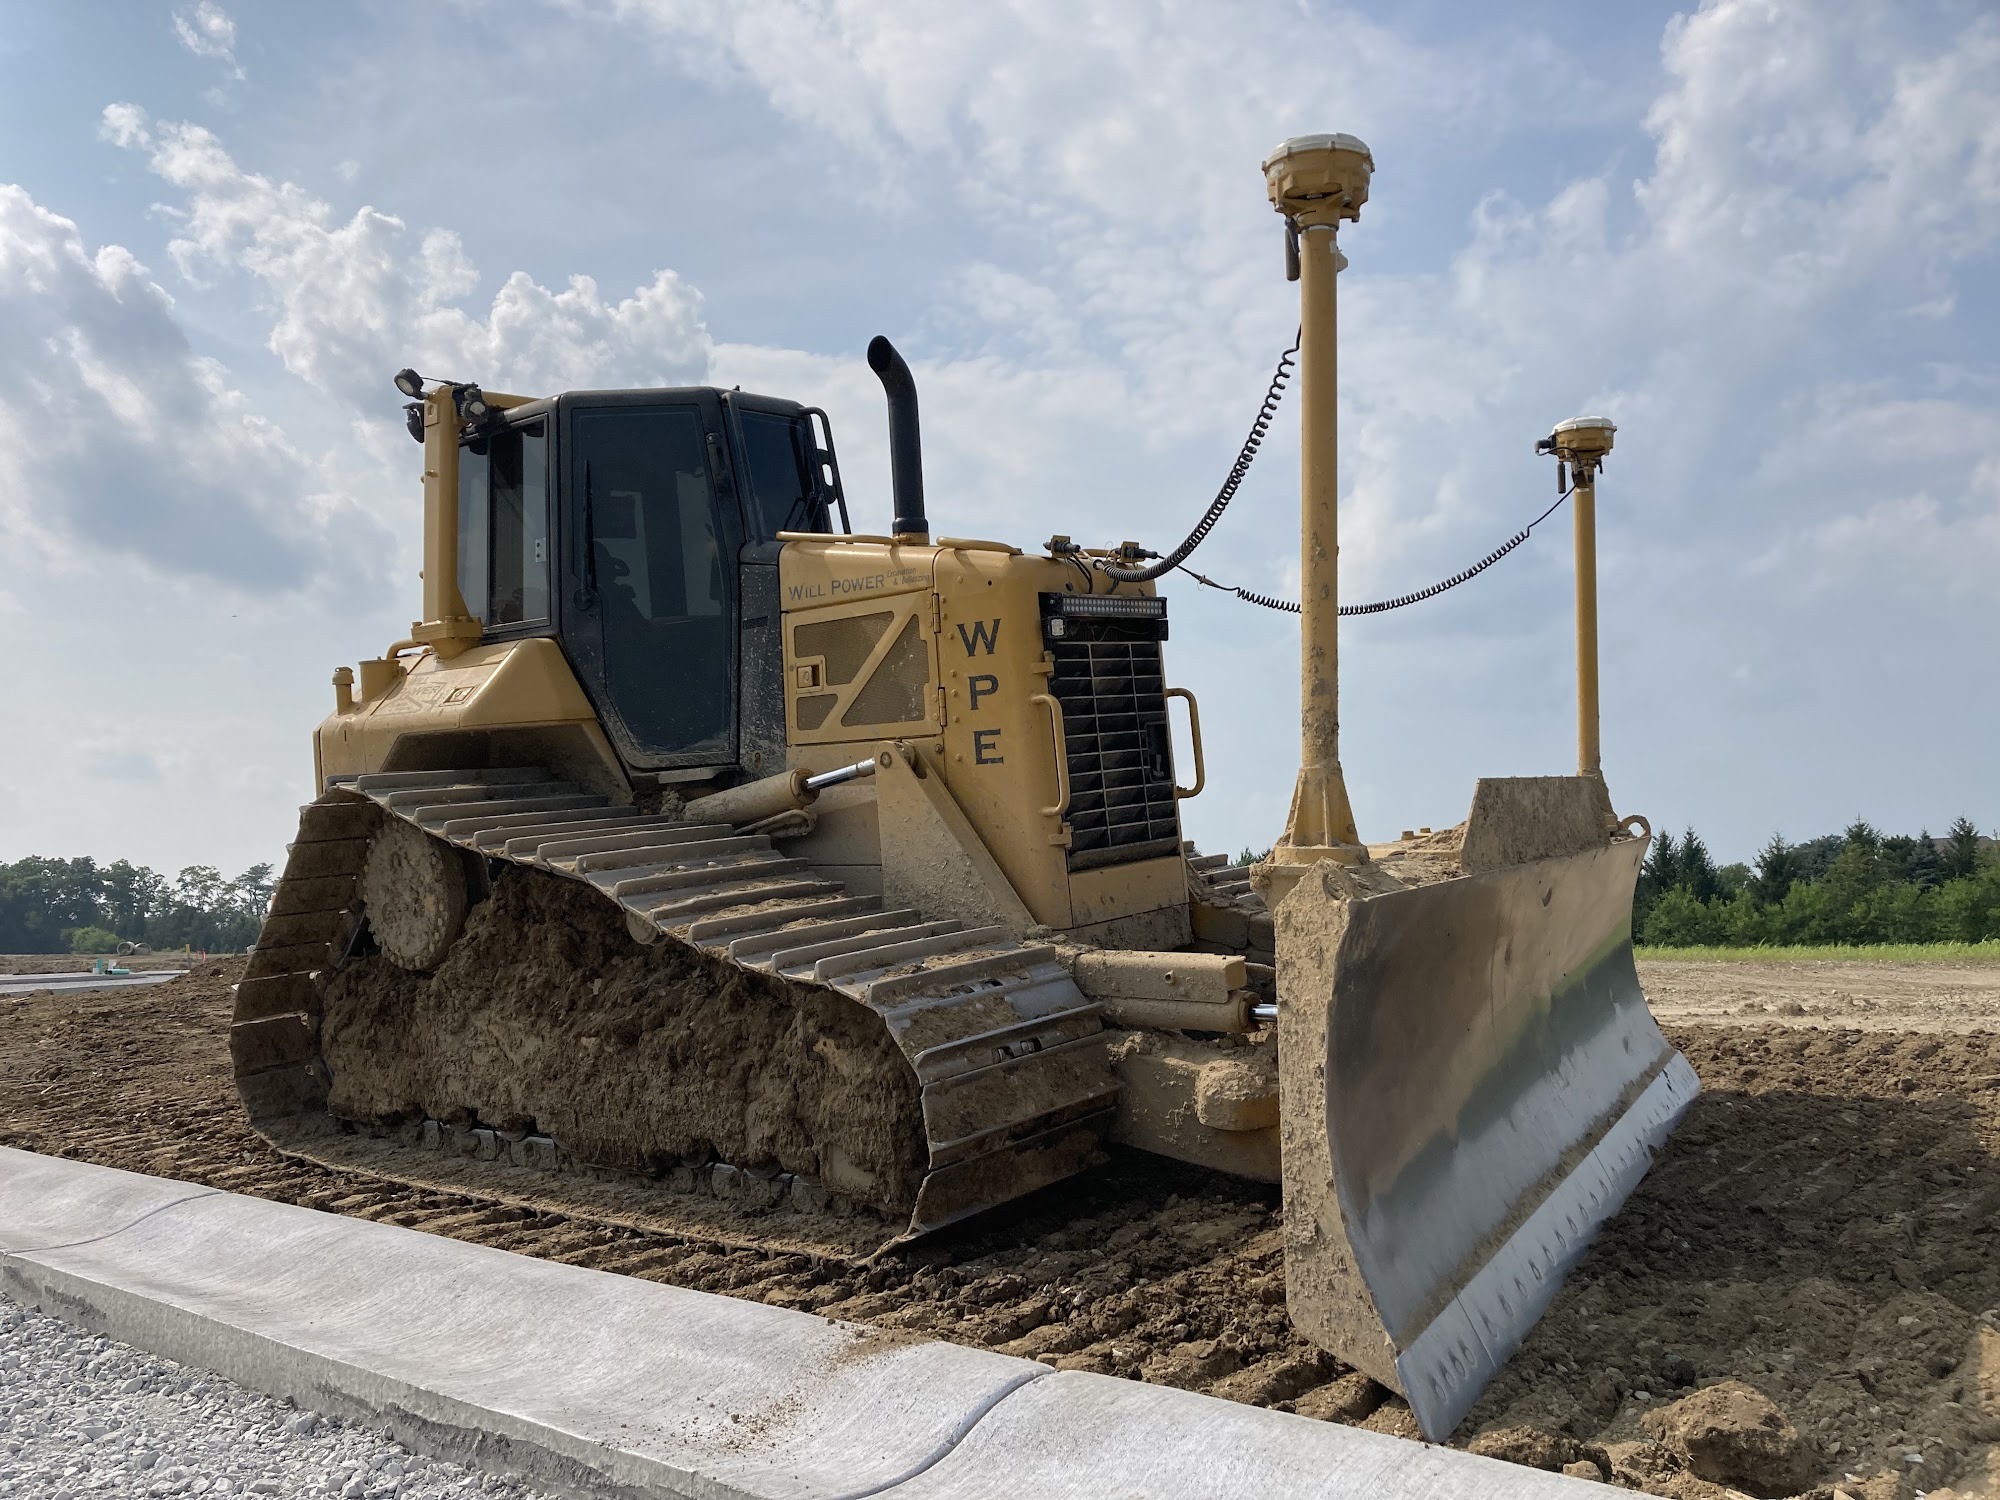 Will Power Excavation and Bulldozing 770 S Peru St, Cicero Indiana 46034